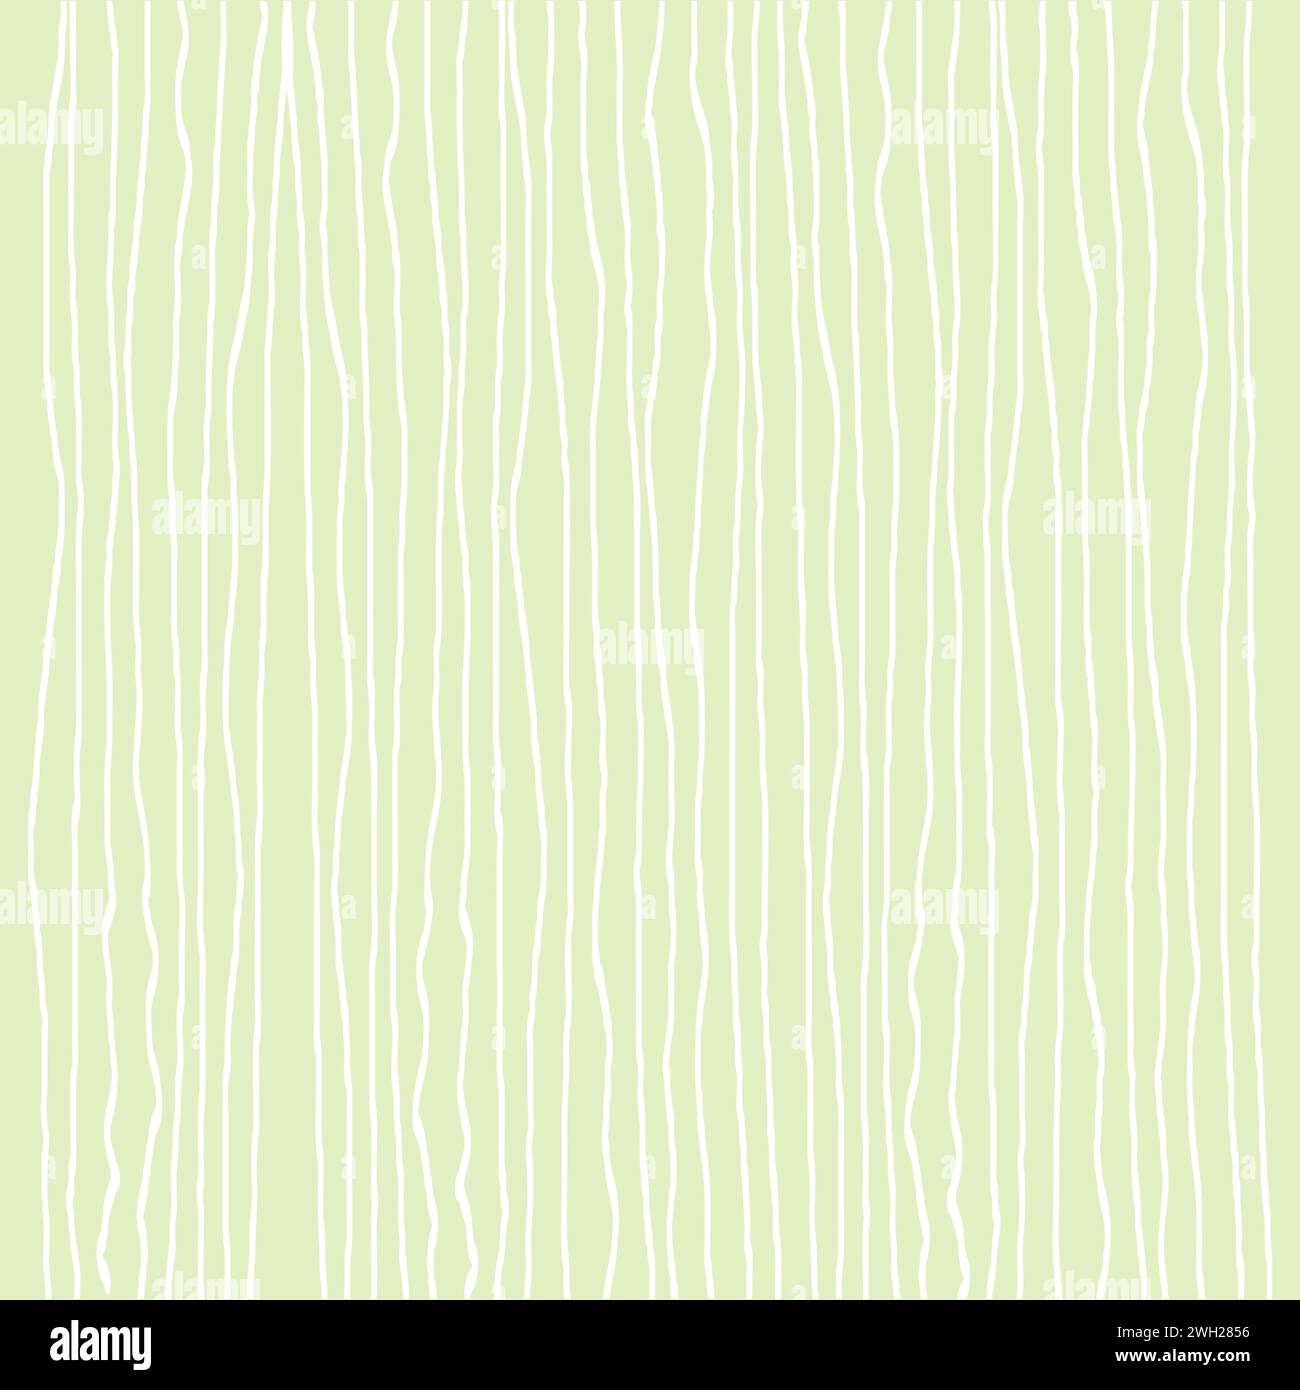 Vector hand drawn cute striped pattern. messy small Doodle Plaid geometrical simple texture. Crossing lines. Abstract cute delicate pattern ideal for Stock Vector